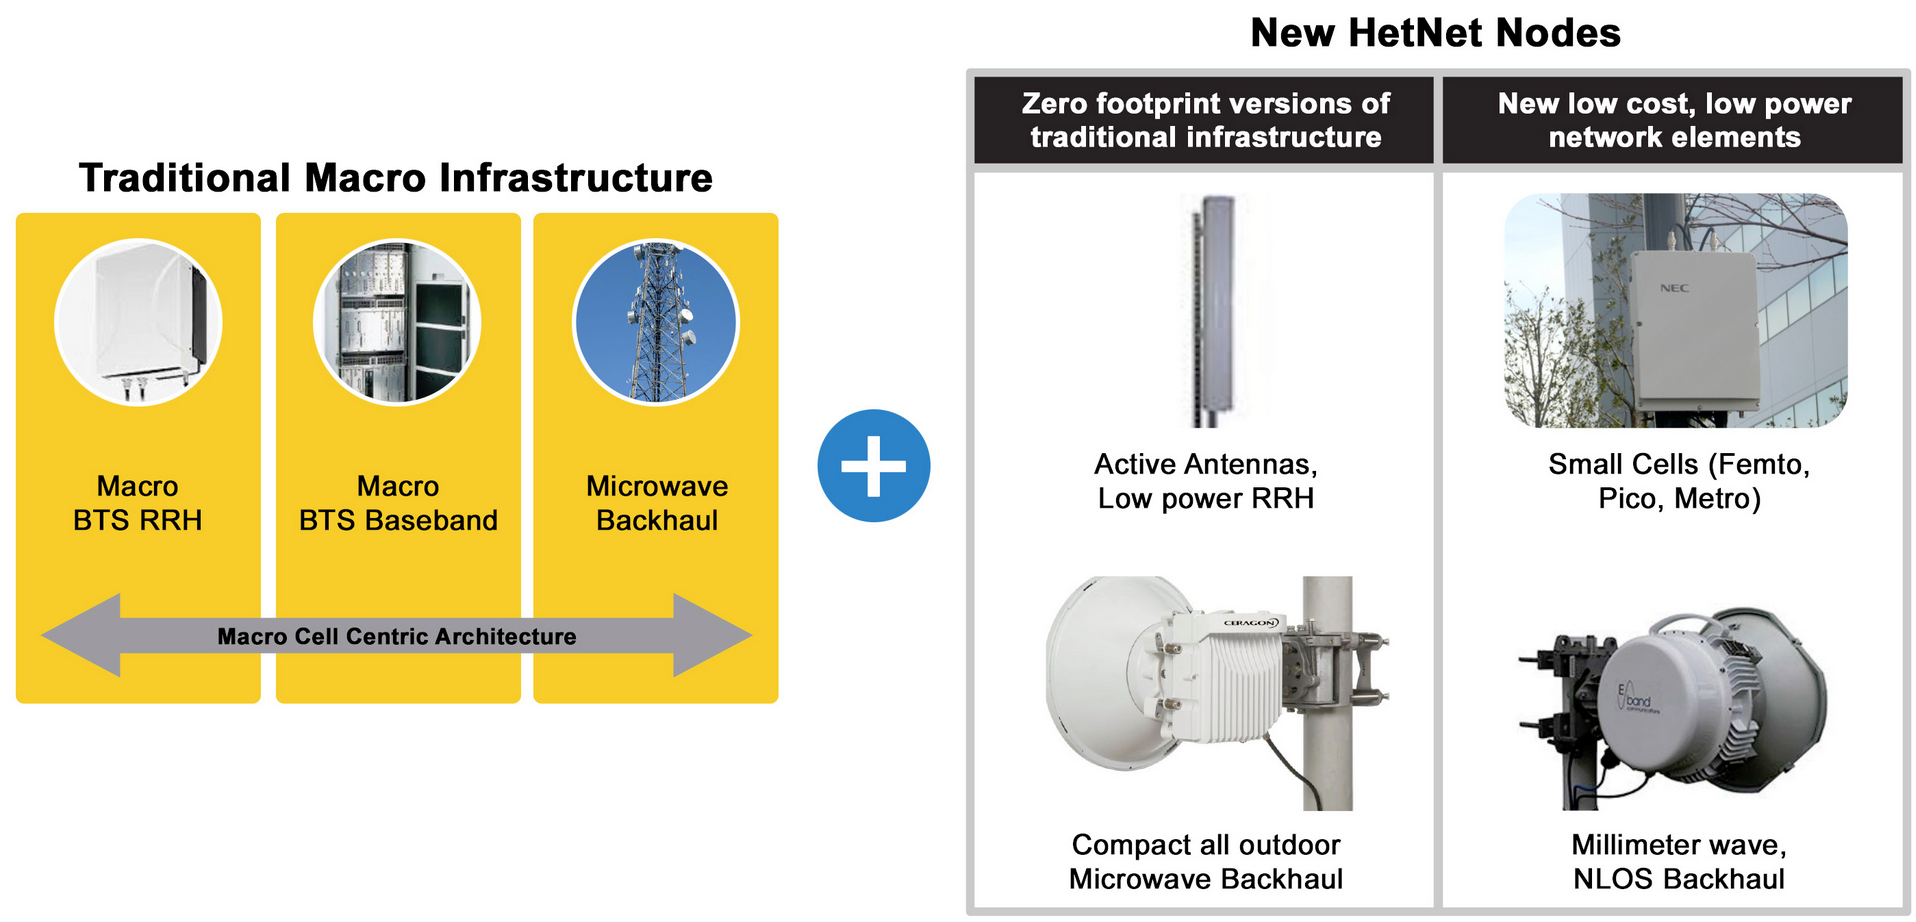 Figure 1 – Today’s evolving wireless Heterogeneous Networks (HetNets) combine zero footprint versions of traditional macro architecture with a variety of new low power, low cost network elements.